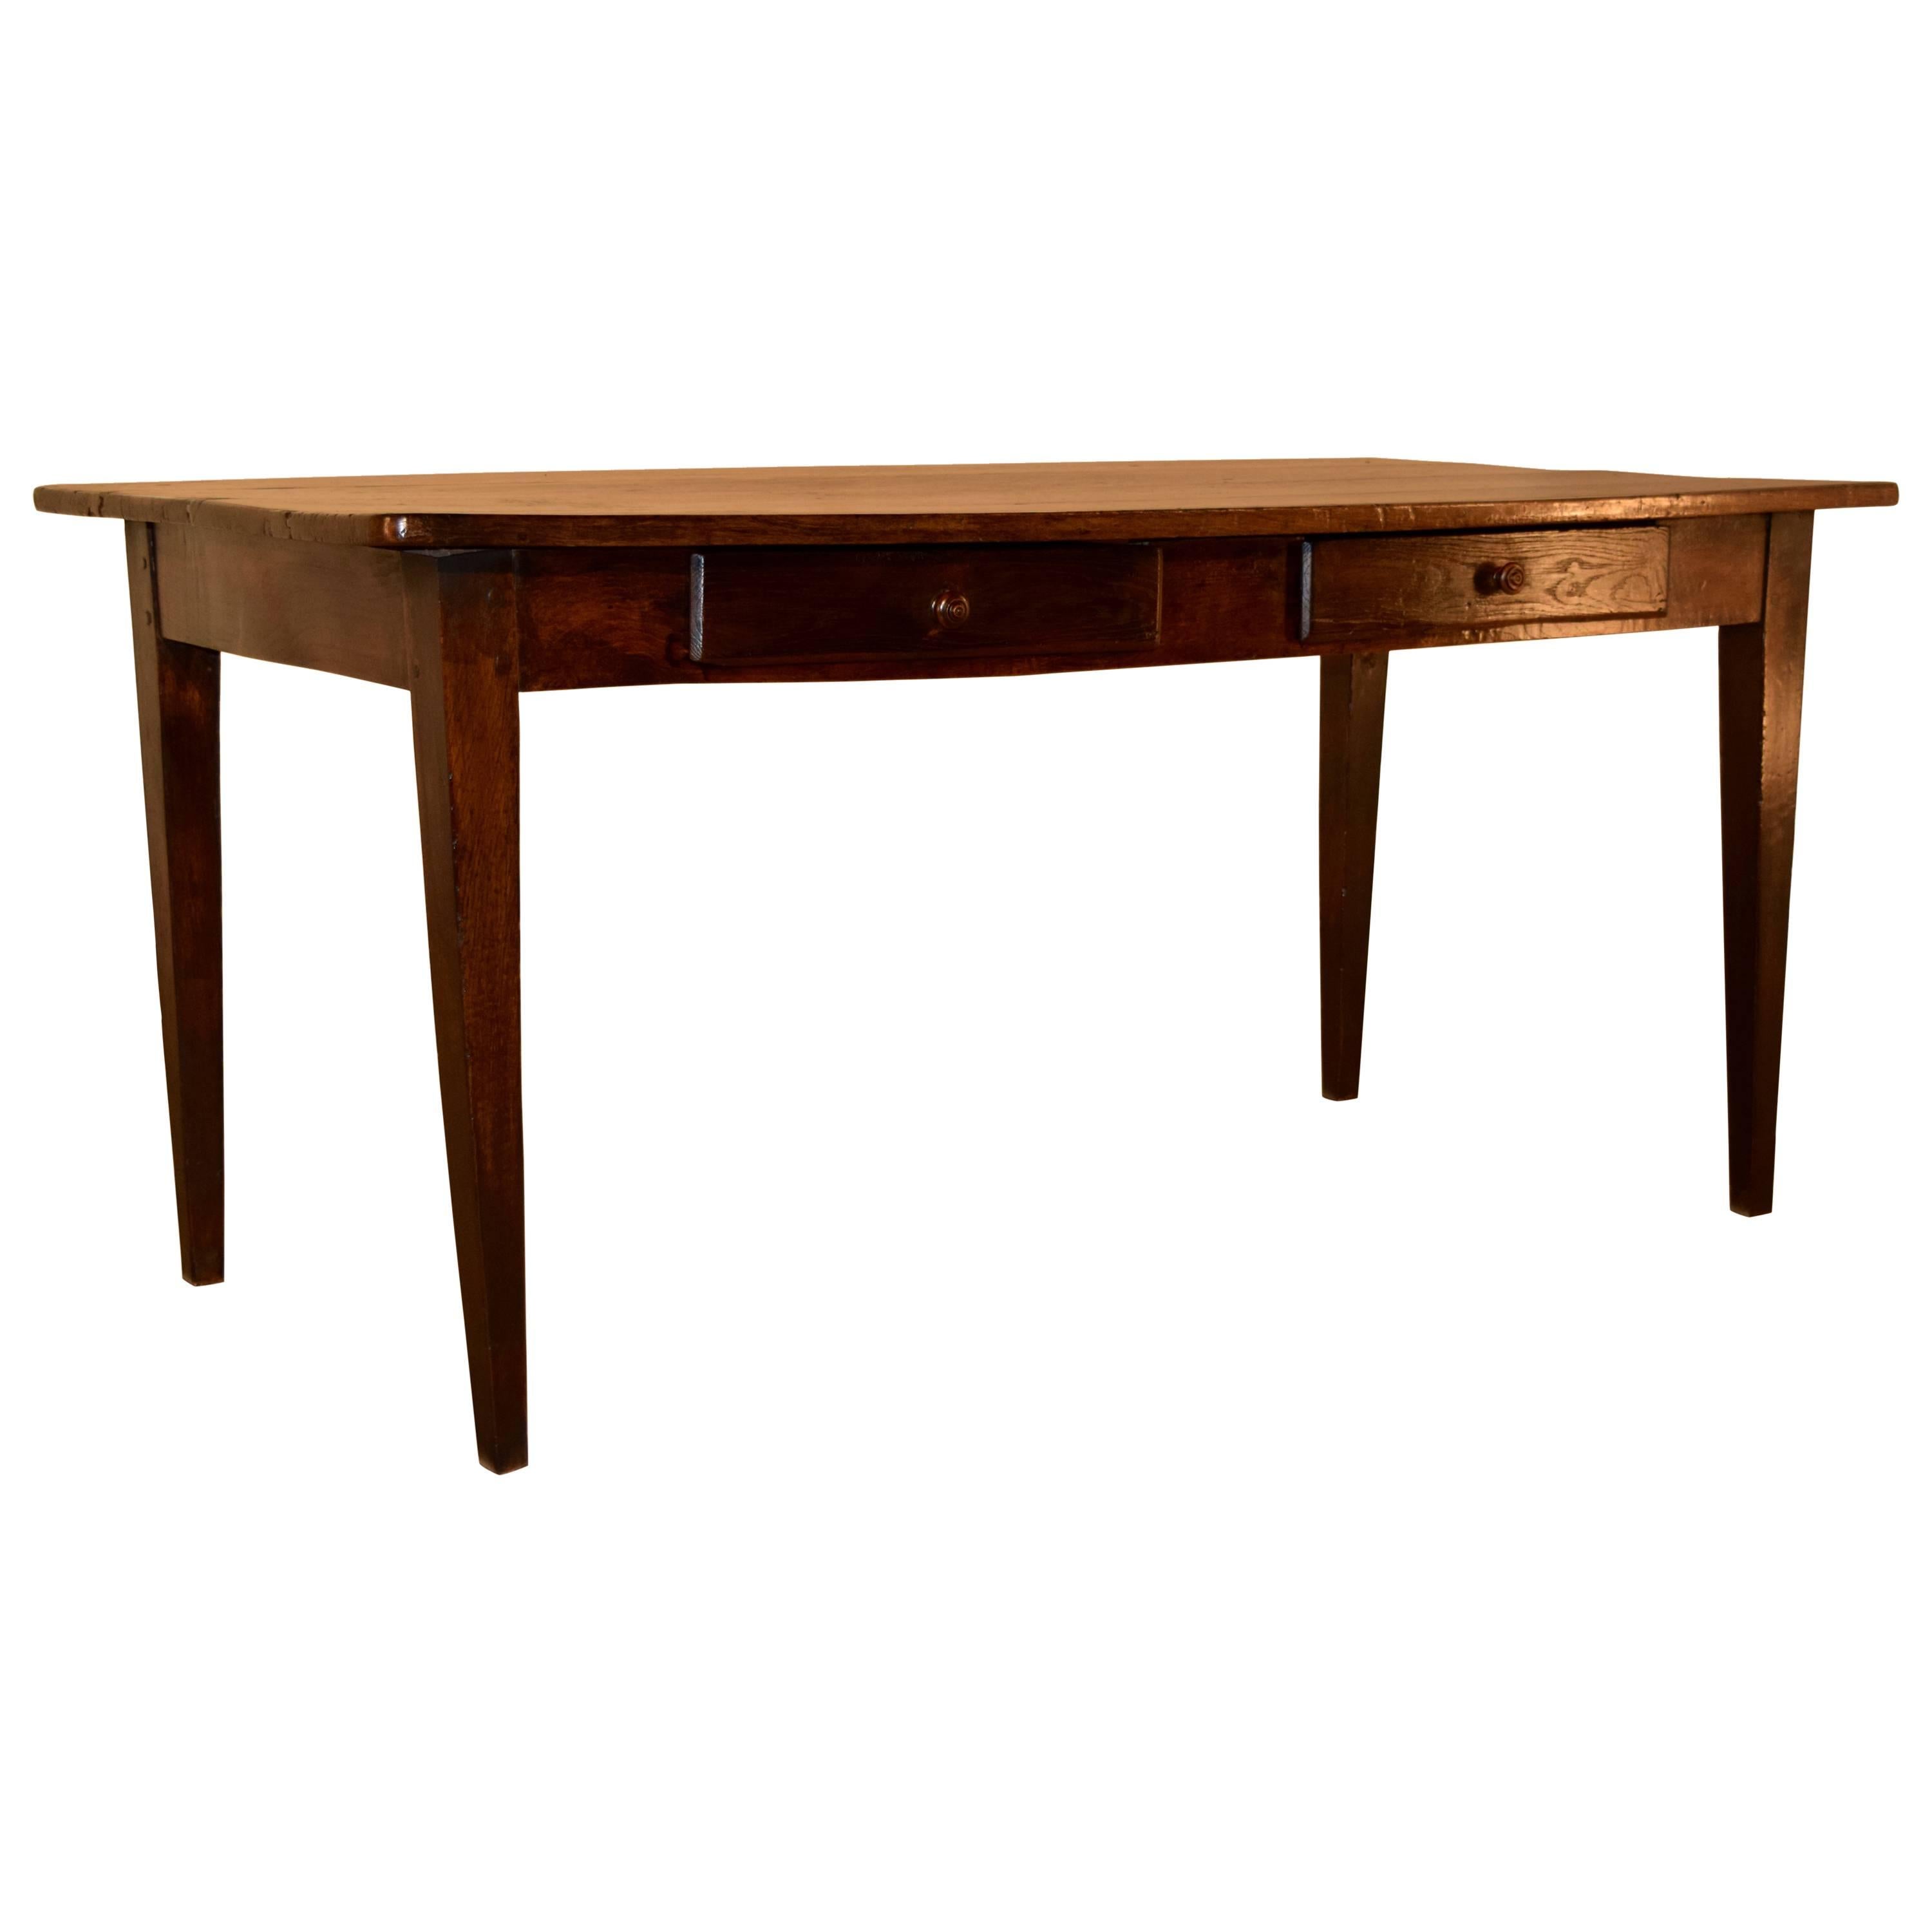 Early 19th Century French Chestnut Farm Table